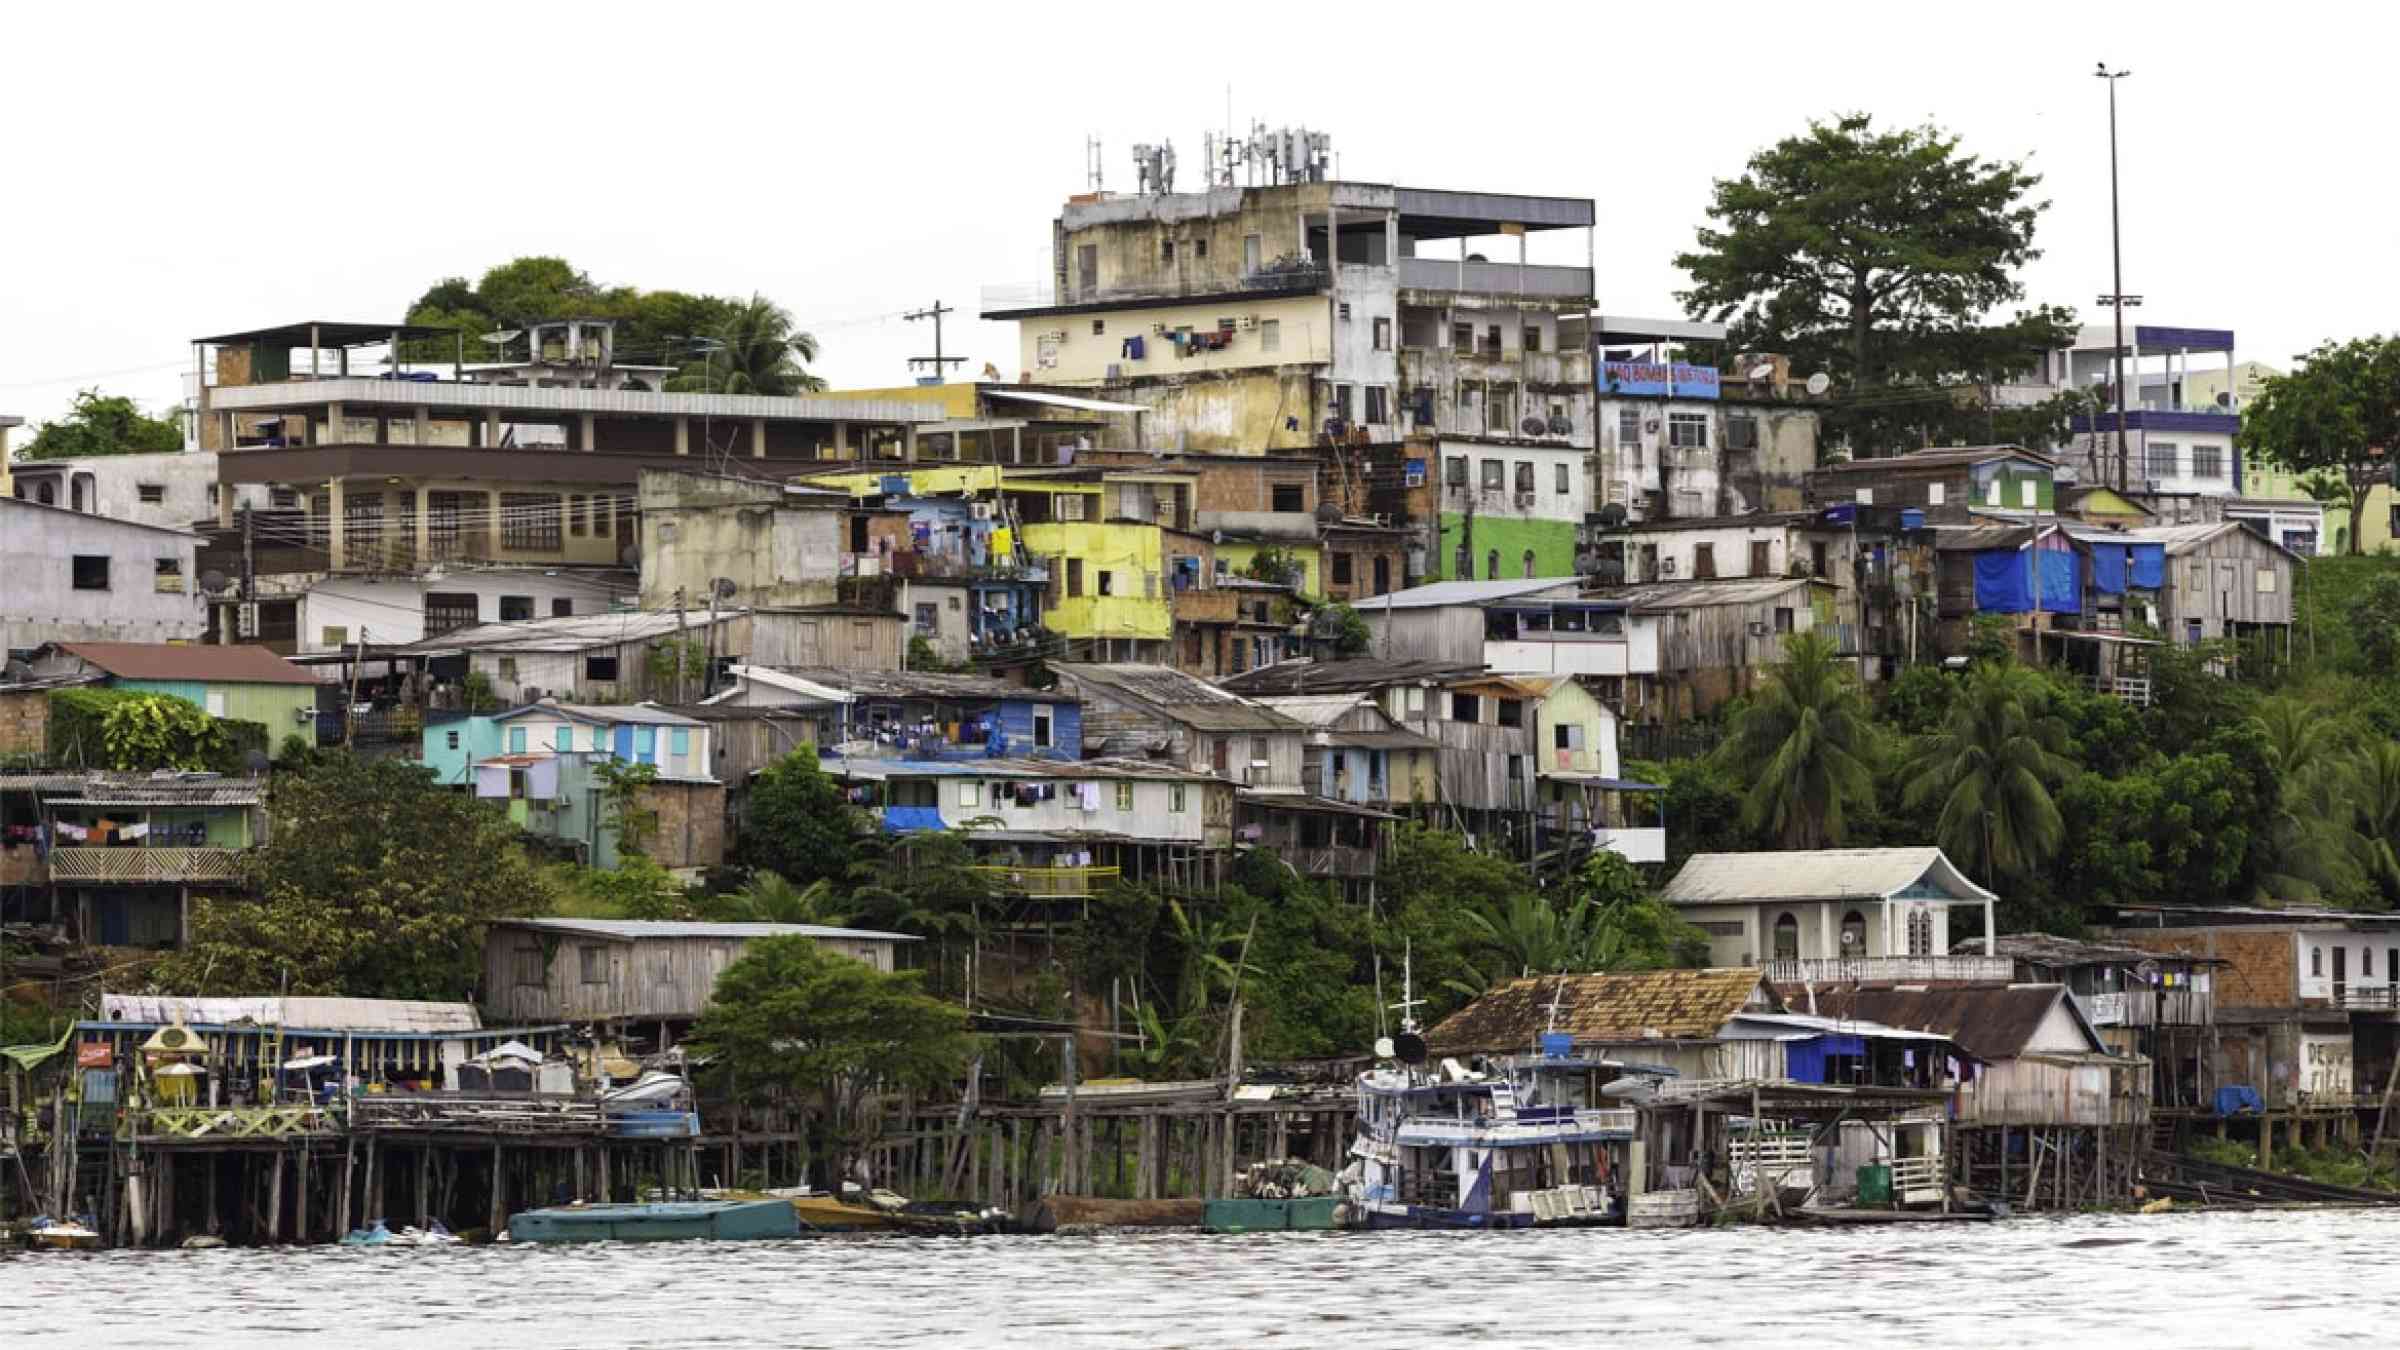 Traditional houses by the river in Manaus, Brasil.